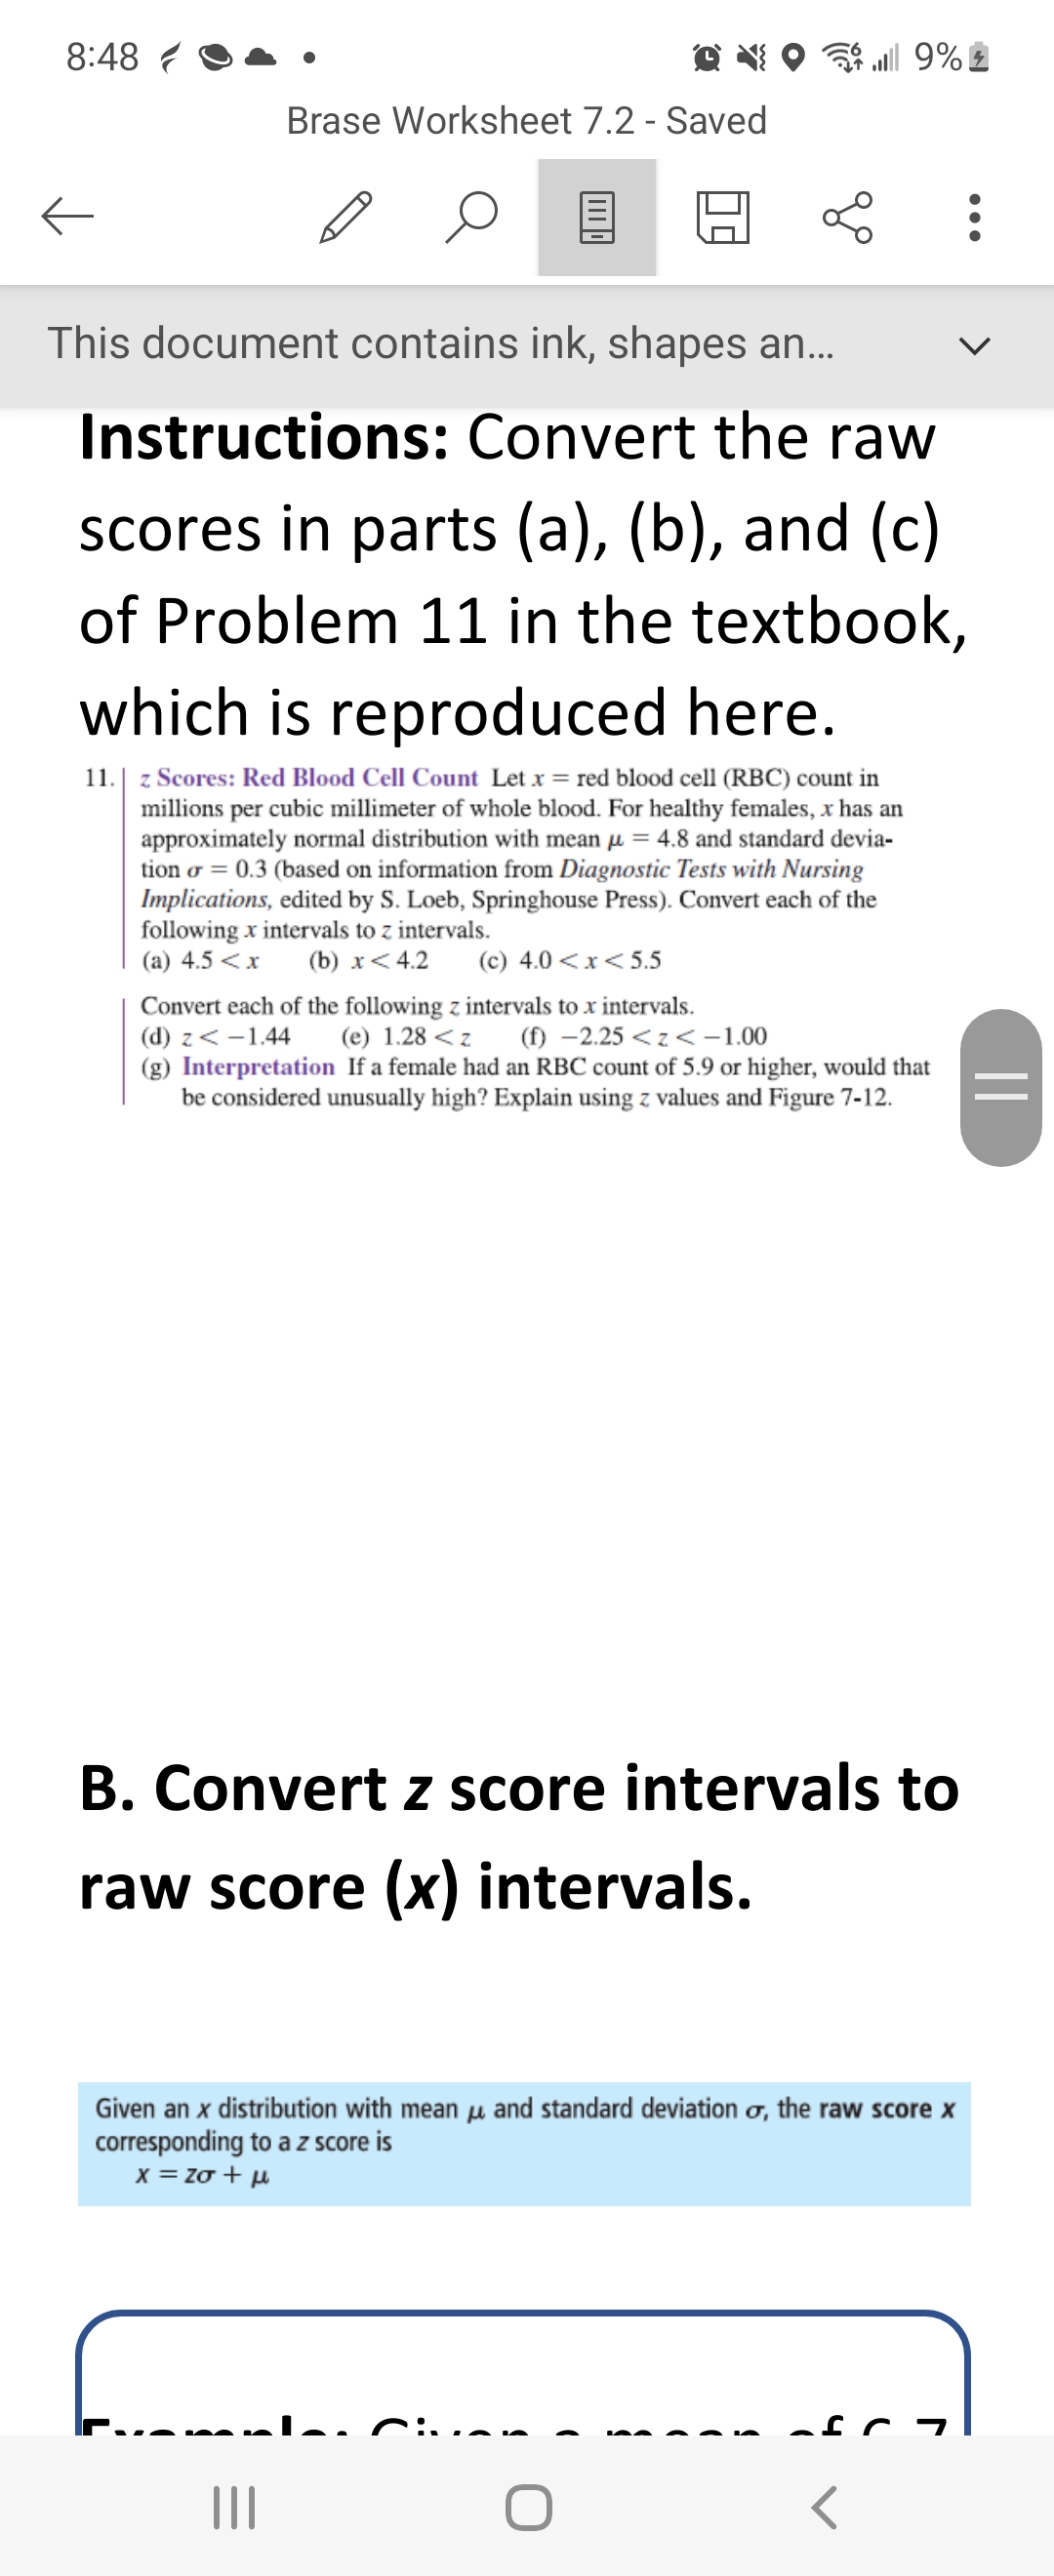 8:48
←
Brase Worksheet 7.2 - Saved
←
...| 9%
This document contains ink, shapes an...
Instructions: Convert the raw
scores in parts (a), (b), and (c)
of Problem 11 in the textbook,
which is reproduced here.
11.
z Scores: Red Blood Cell Count Let x = red blood cell (RBC) count in
millions per cubic millimeter of whole blood. For healthy females, x has an
approximately normal distribution with mean = 4.8 and standard devia-
tion = 0.3 (based on information from Diagnostic Tests with Nursing
Implications, edited by S. Loeb, Springhouse Press). Convert each of the
following x intervals to z intervals.
(a) 4.5 < x (b) x < 4.2 (c) 4.0<x<5.5
Convert each of the following z intervals to x intervals.
(d) z < -1.44 (e) 1.28 <z
(f) -2.25<z<-1.00
(g) Interpretation If a female had an RBC count of 5.9 or higher, would that
be considered unusually high? Explain using z values and Figure 7-12.
|||
B. Convert z score intervals to
raw score (x) intervals.
Given an x distribution with mean and standard deviation o, the raw score x
corresponding to a z score is
x=20 tu
:
||